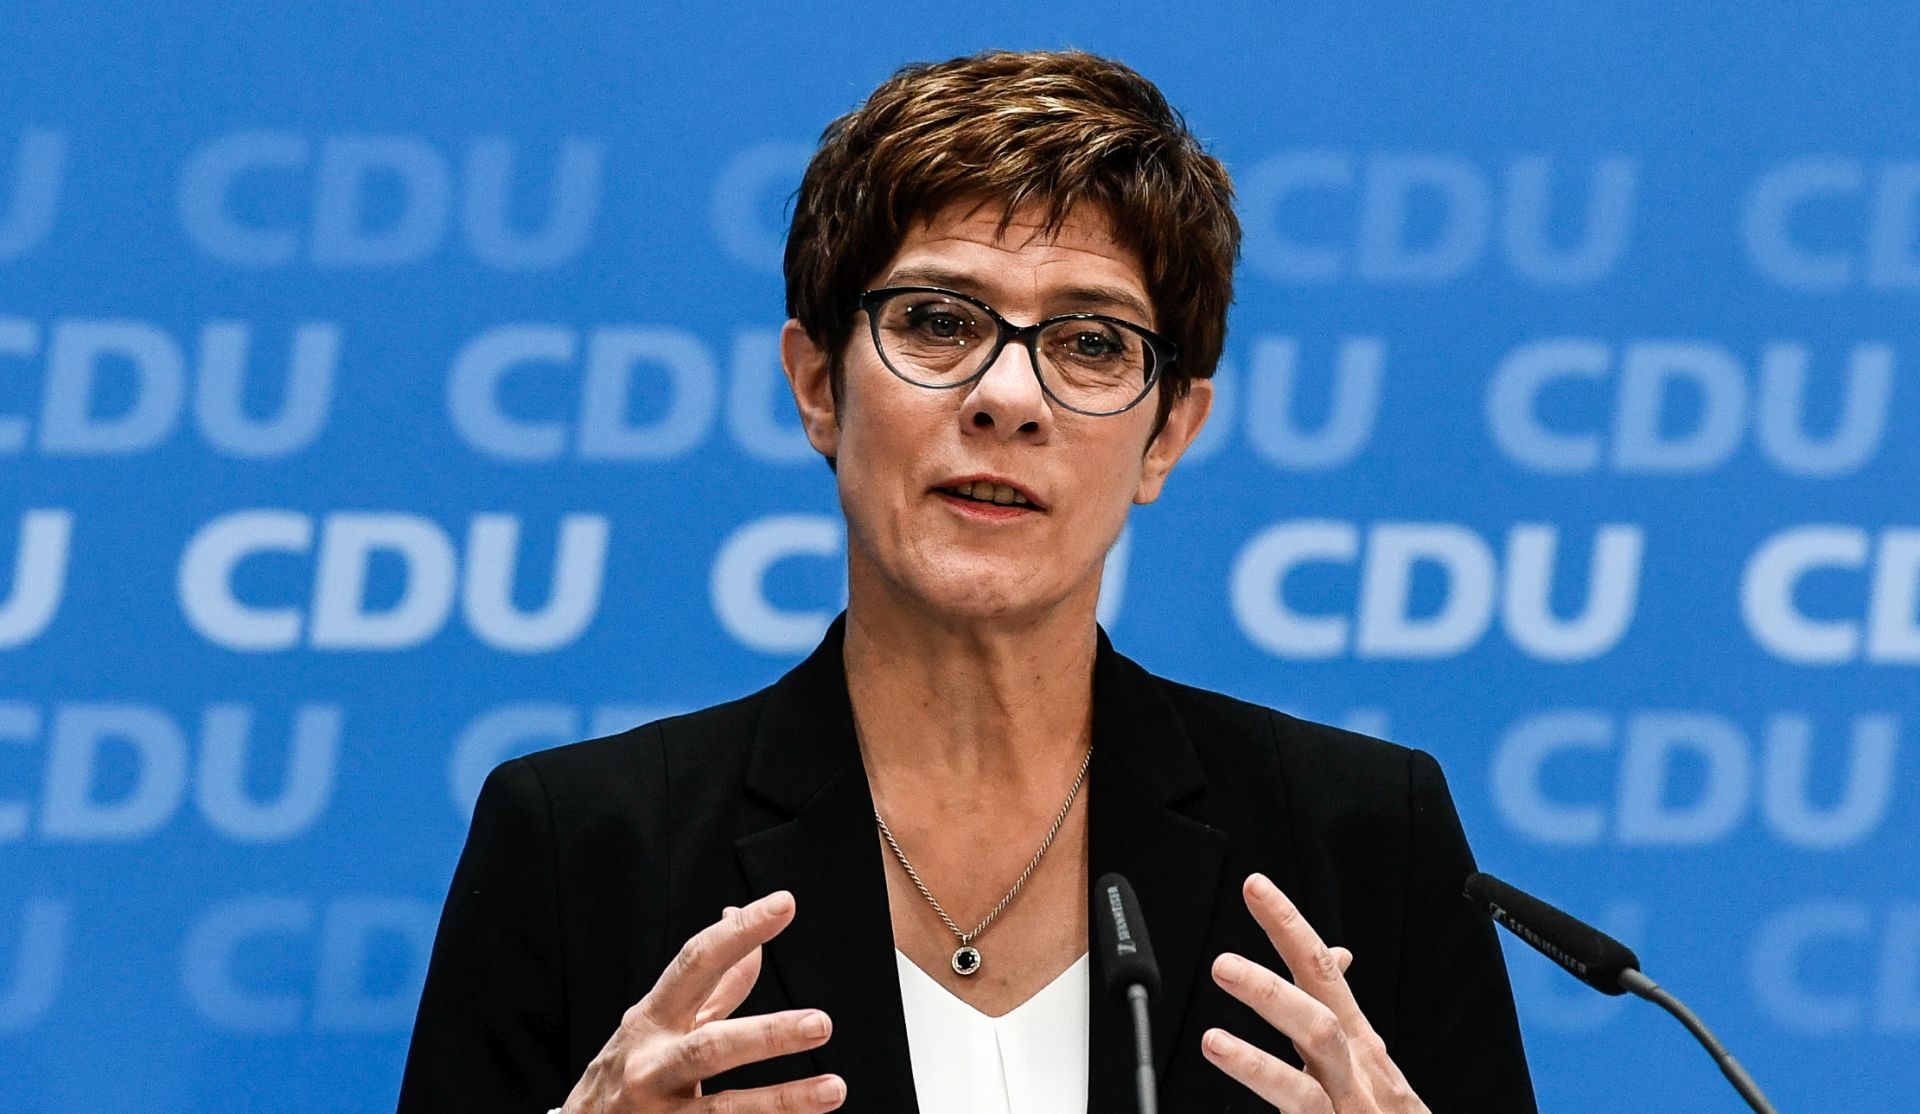 epa07721054 (FILE) Christian Democratic Union (CDU) party chairwoman Annegret Kramp-Karrenbauer speaks during a press conference at the party headquarters in Berlin, Germany, 03 June 2019 (reissued 16 July 2019). According to media reports, Annegret Kramp-Karrenbauer will become new German Defence Minister replacing von der Leyen.  EPA/FILIP SINGER